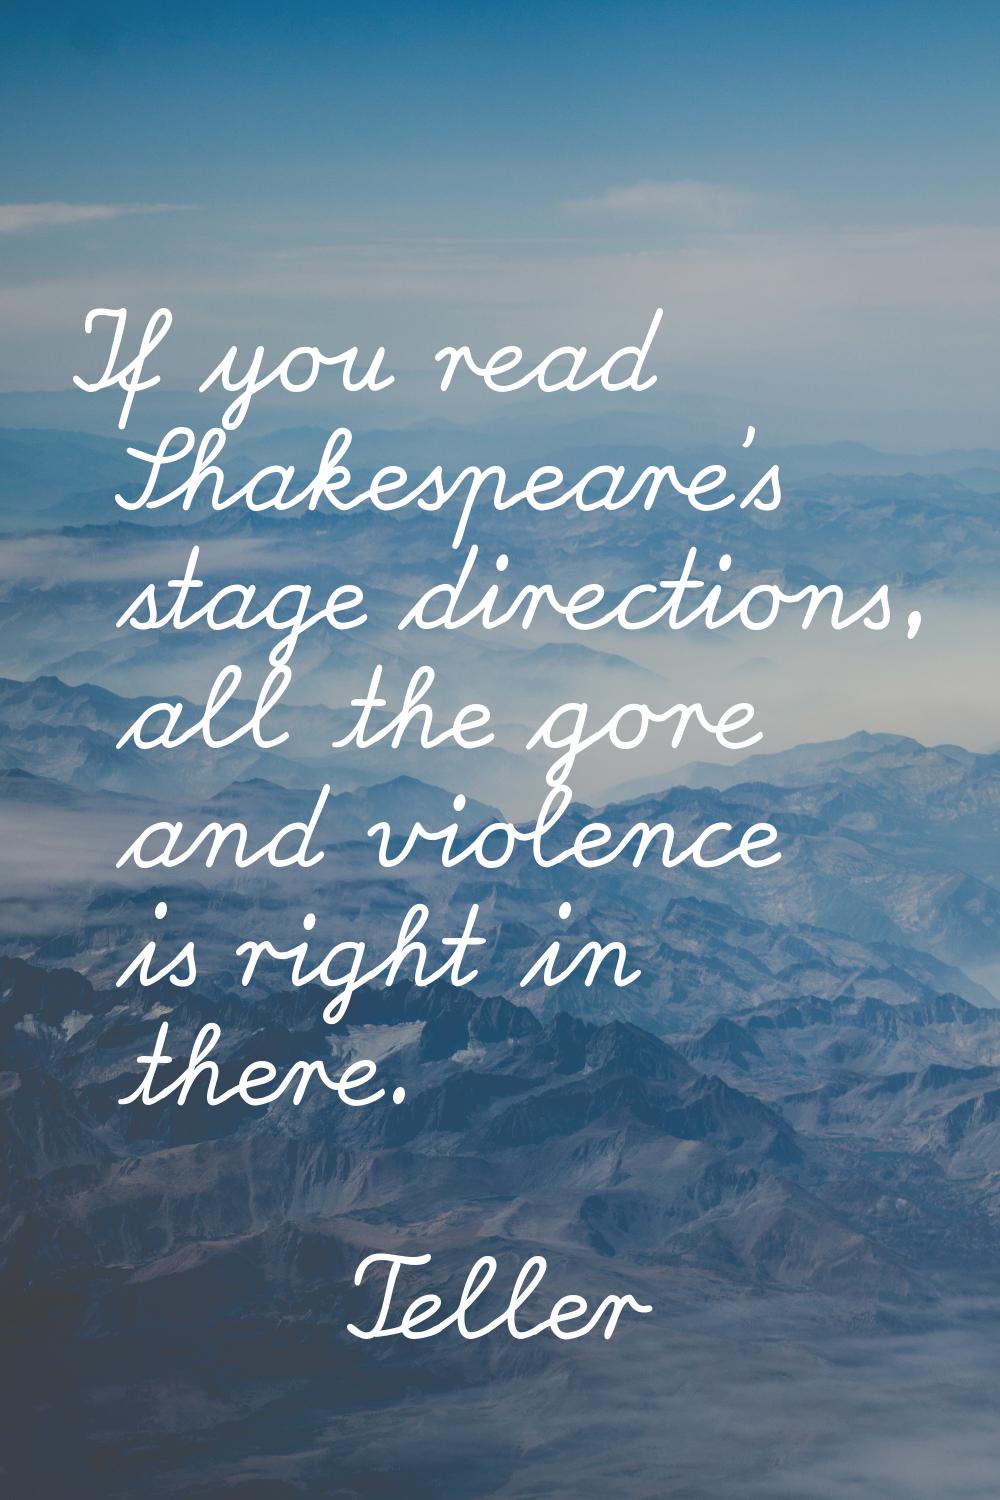 If you read Shakespeare's stage directions, all the gore and violence is right in there.